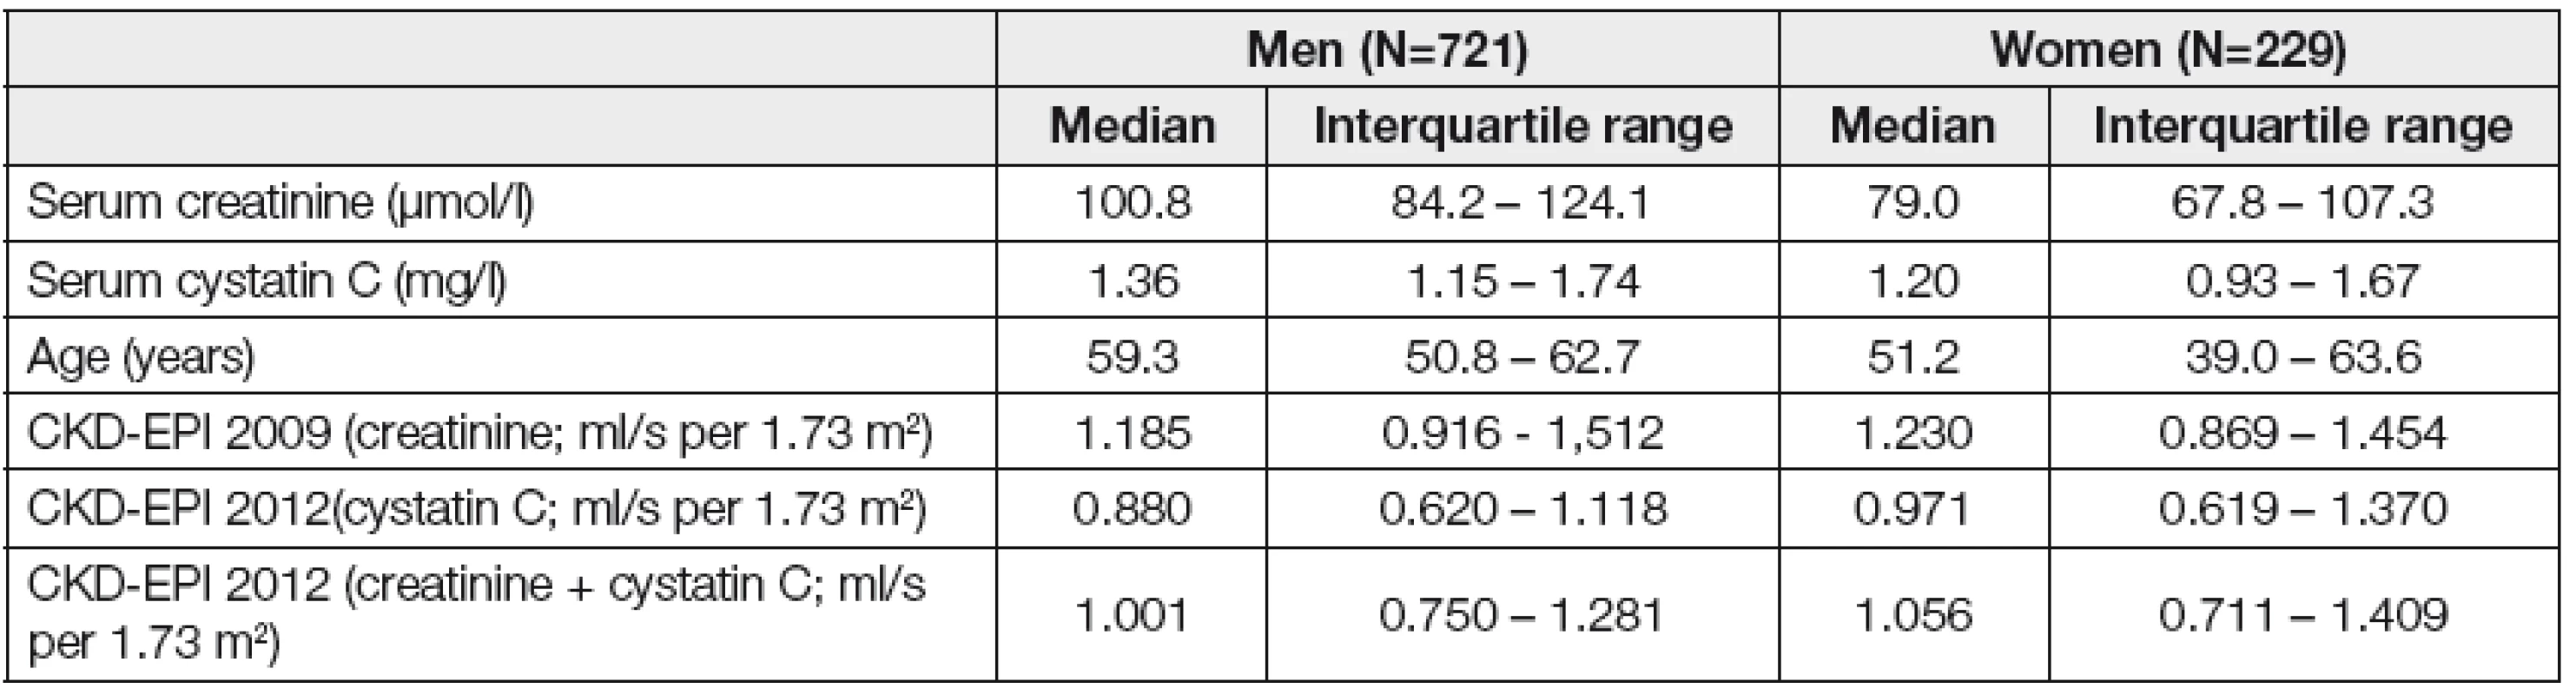 Comparison of both sexes in the IKEM population of patients